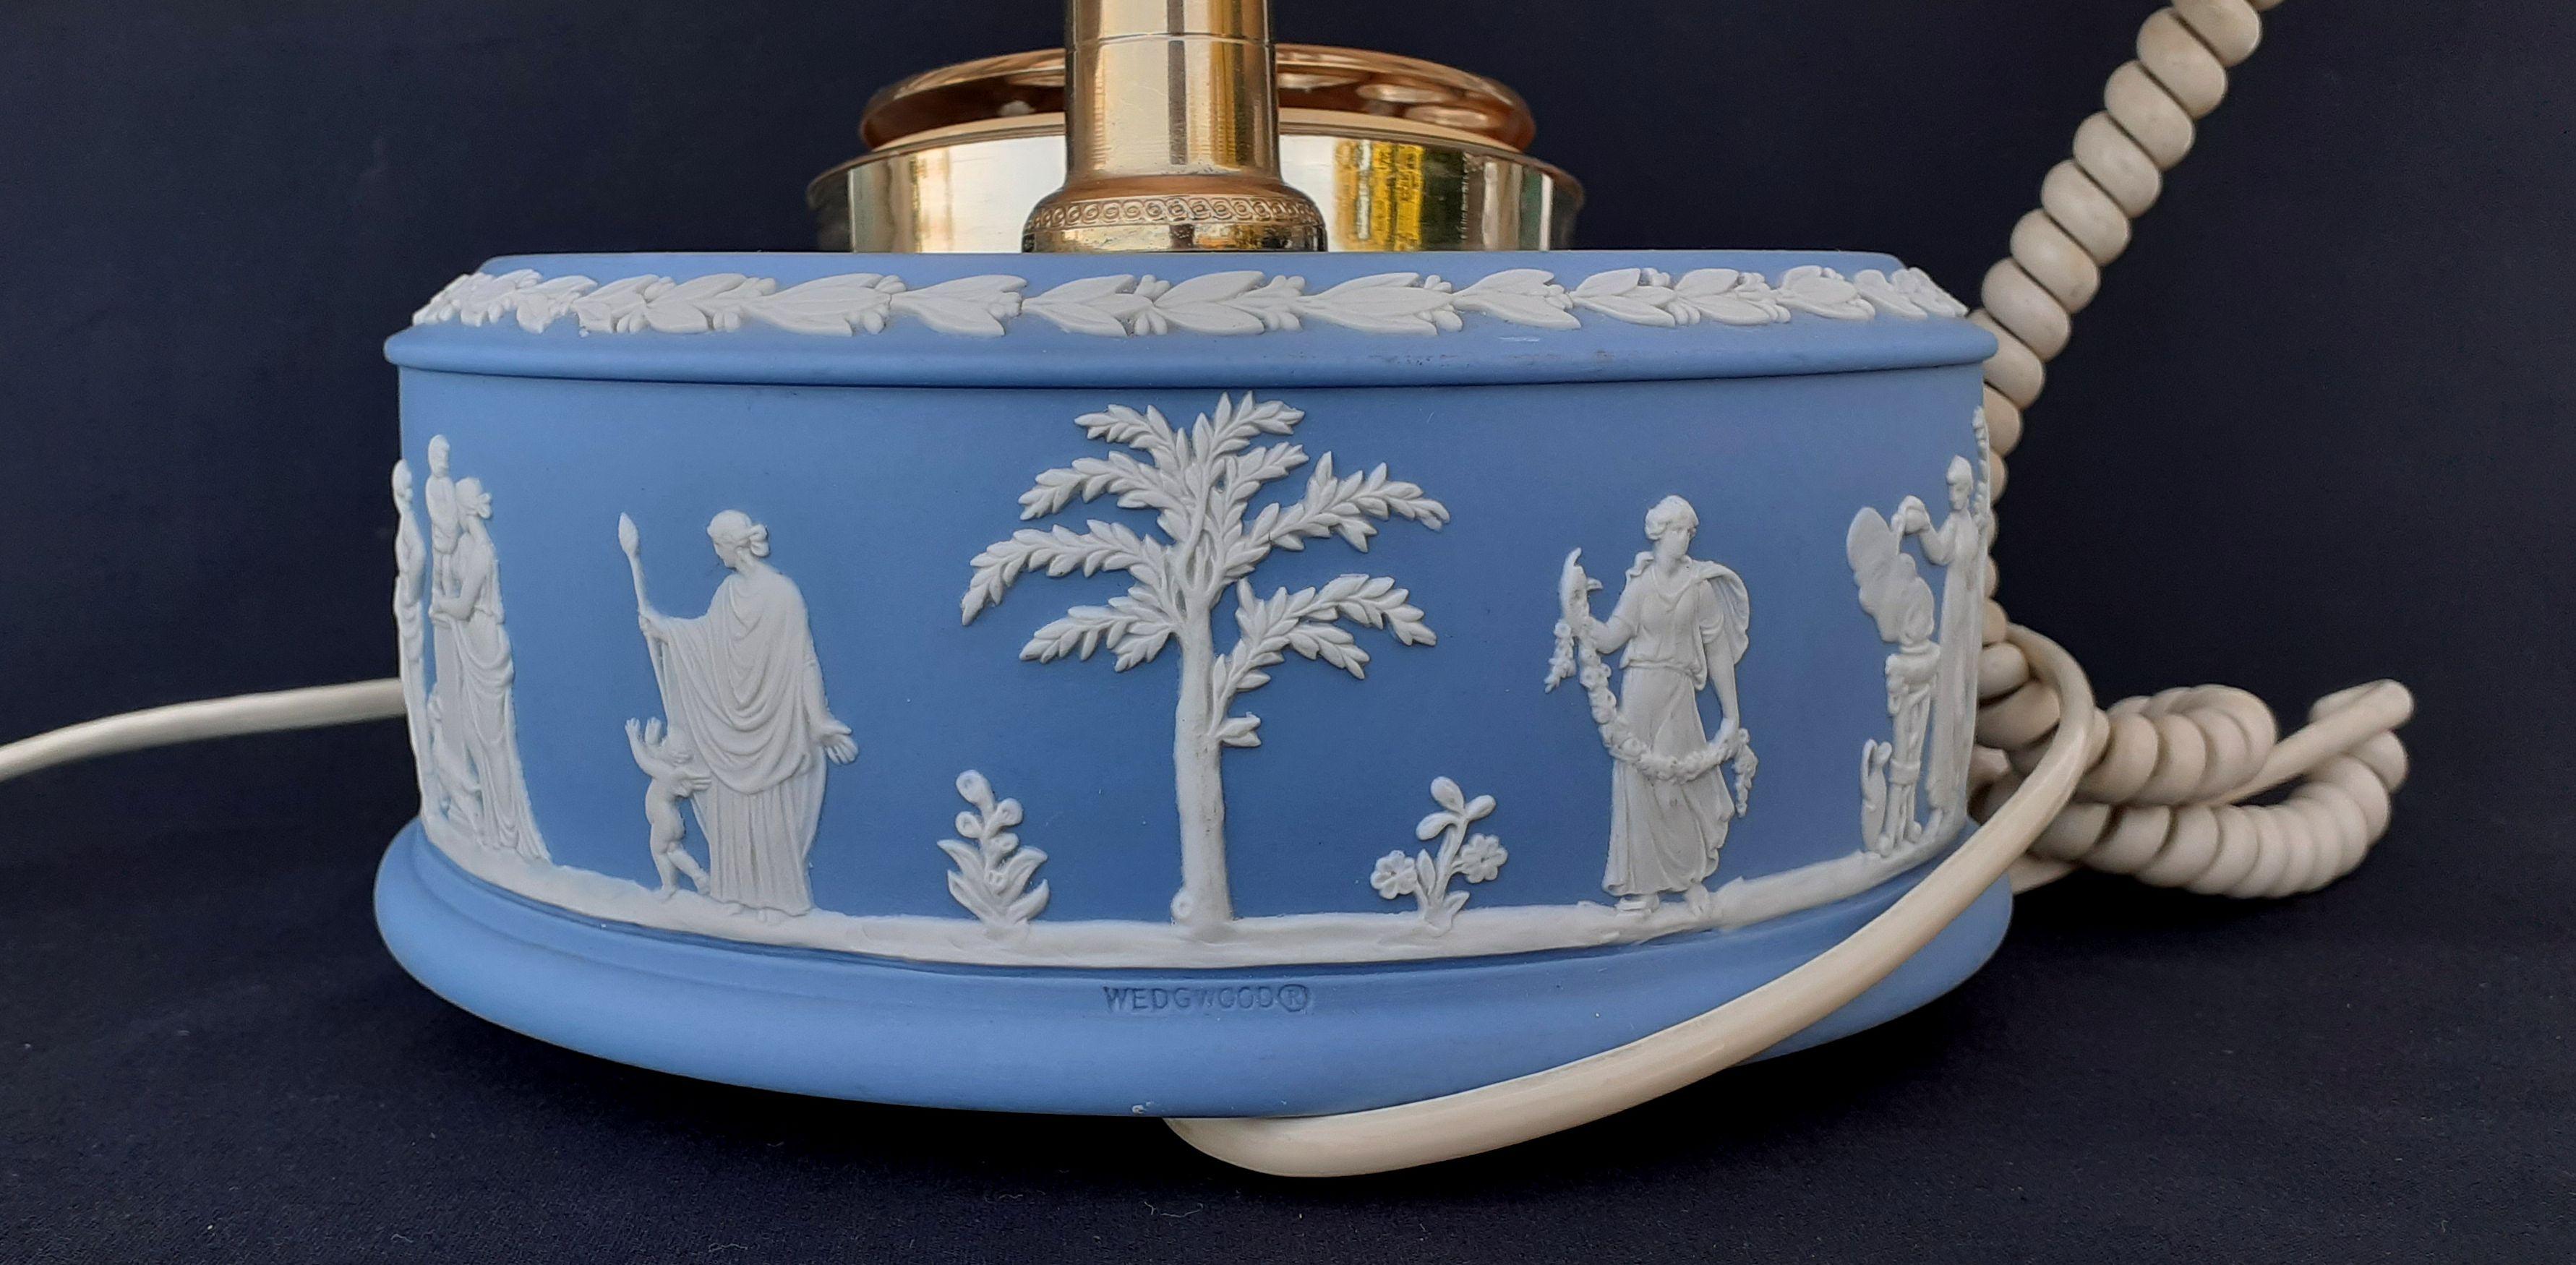 RARE Wedgwood Jasperware Blue Rotary Dial Astral Vintage Telephone Collector For Sale 1